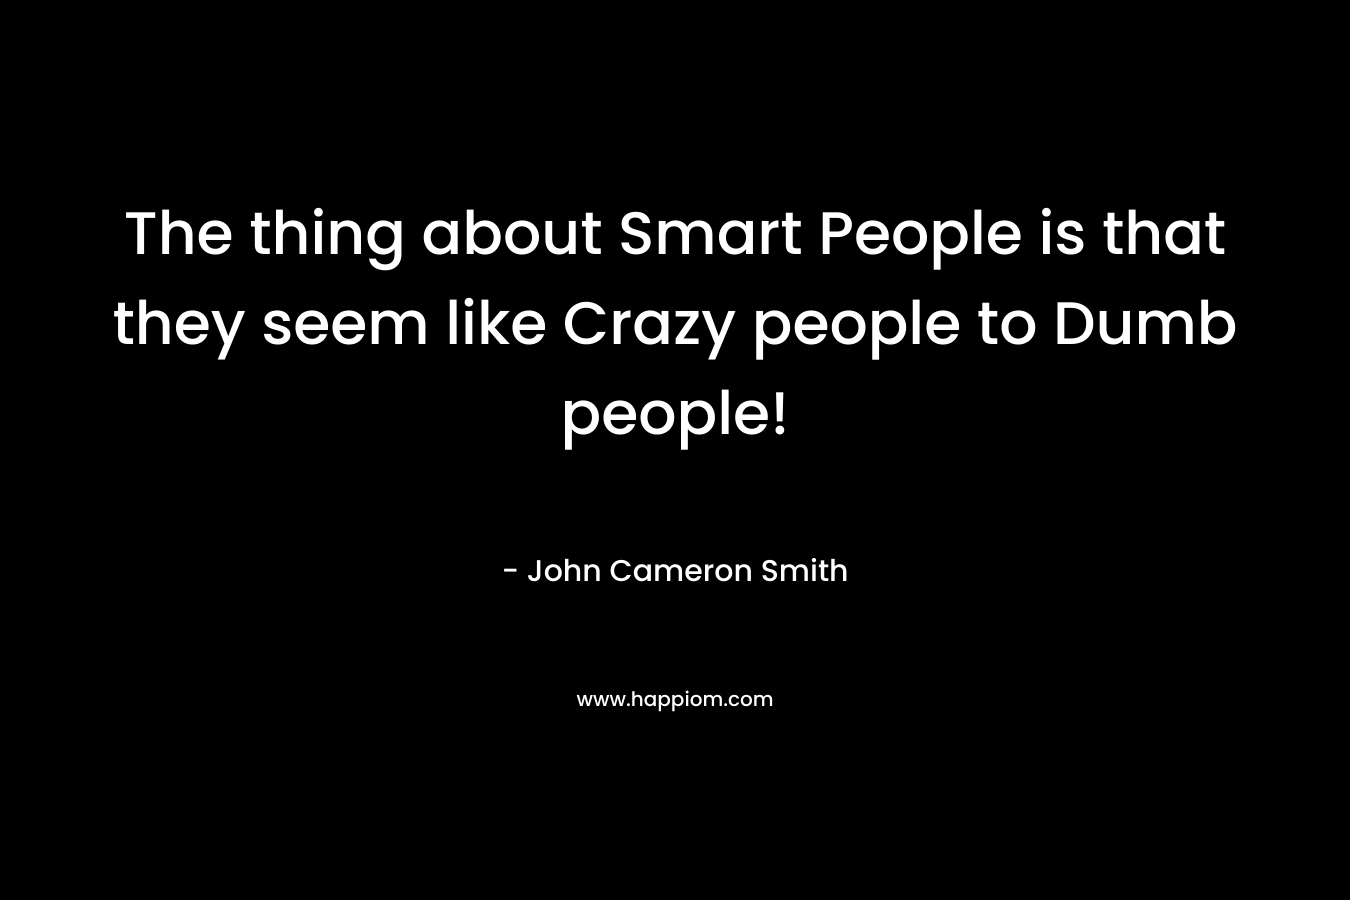 The thing about Smart People is that they seem like Crazy people to Dumb people!